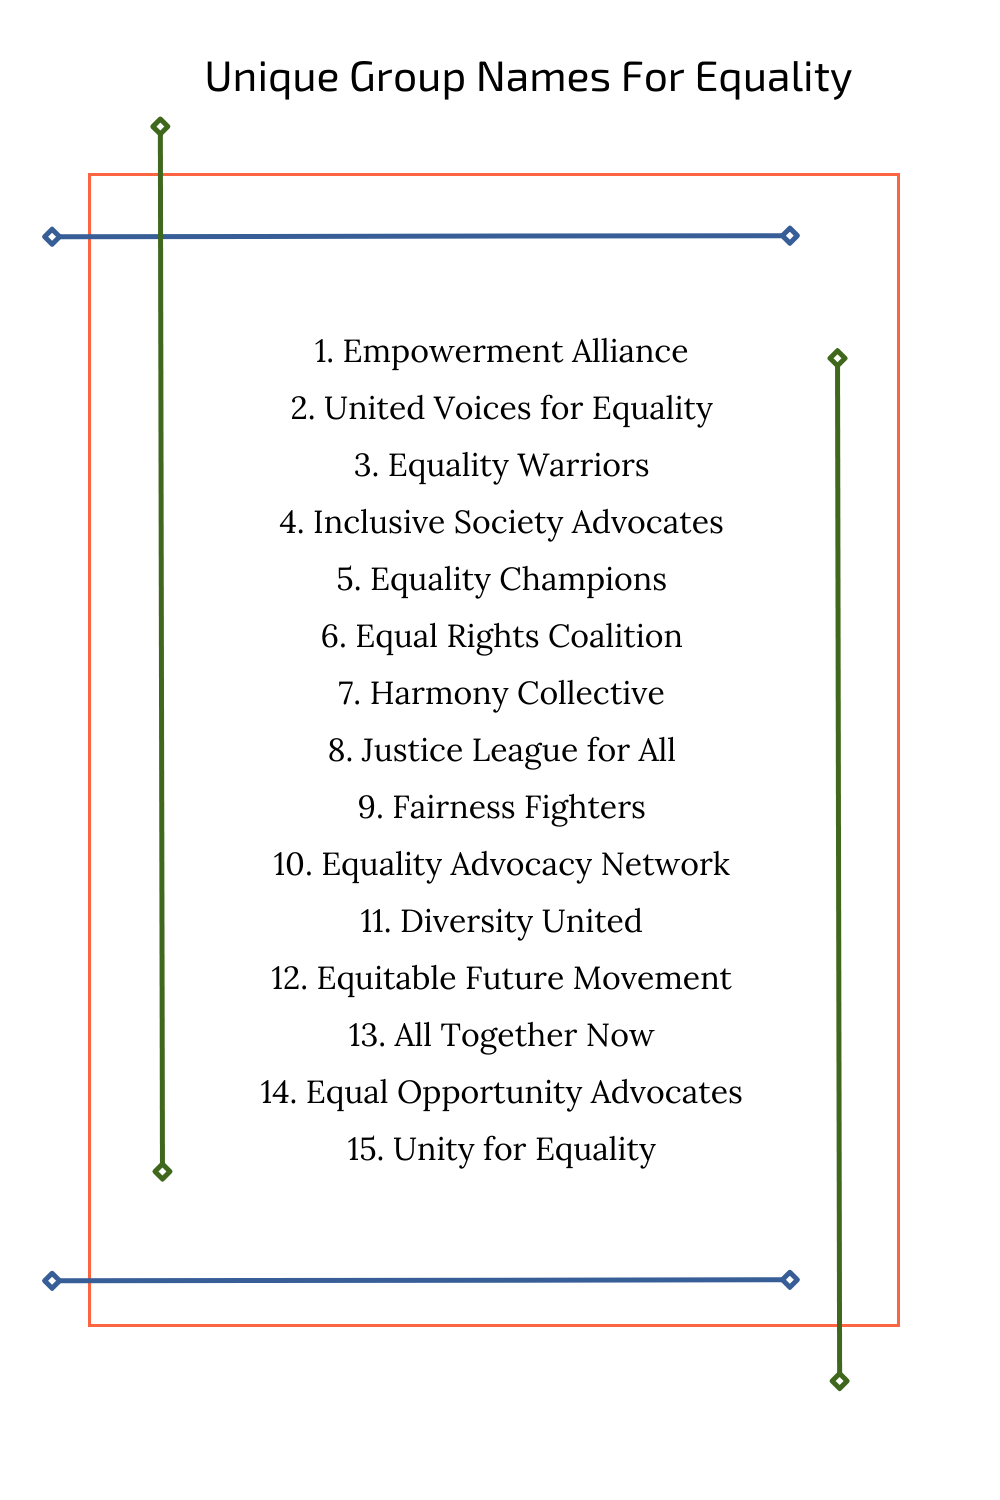 Unique Group Names For Equality